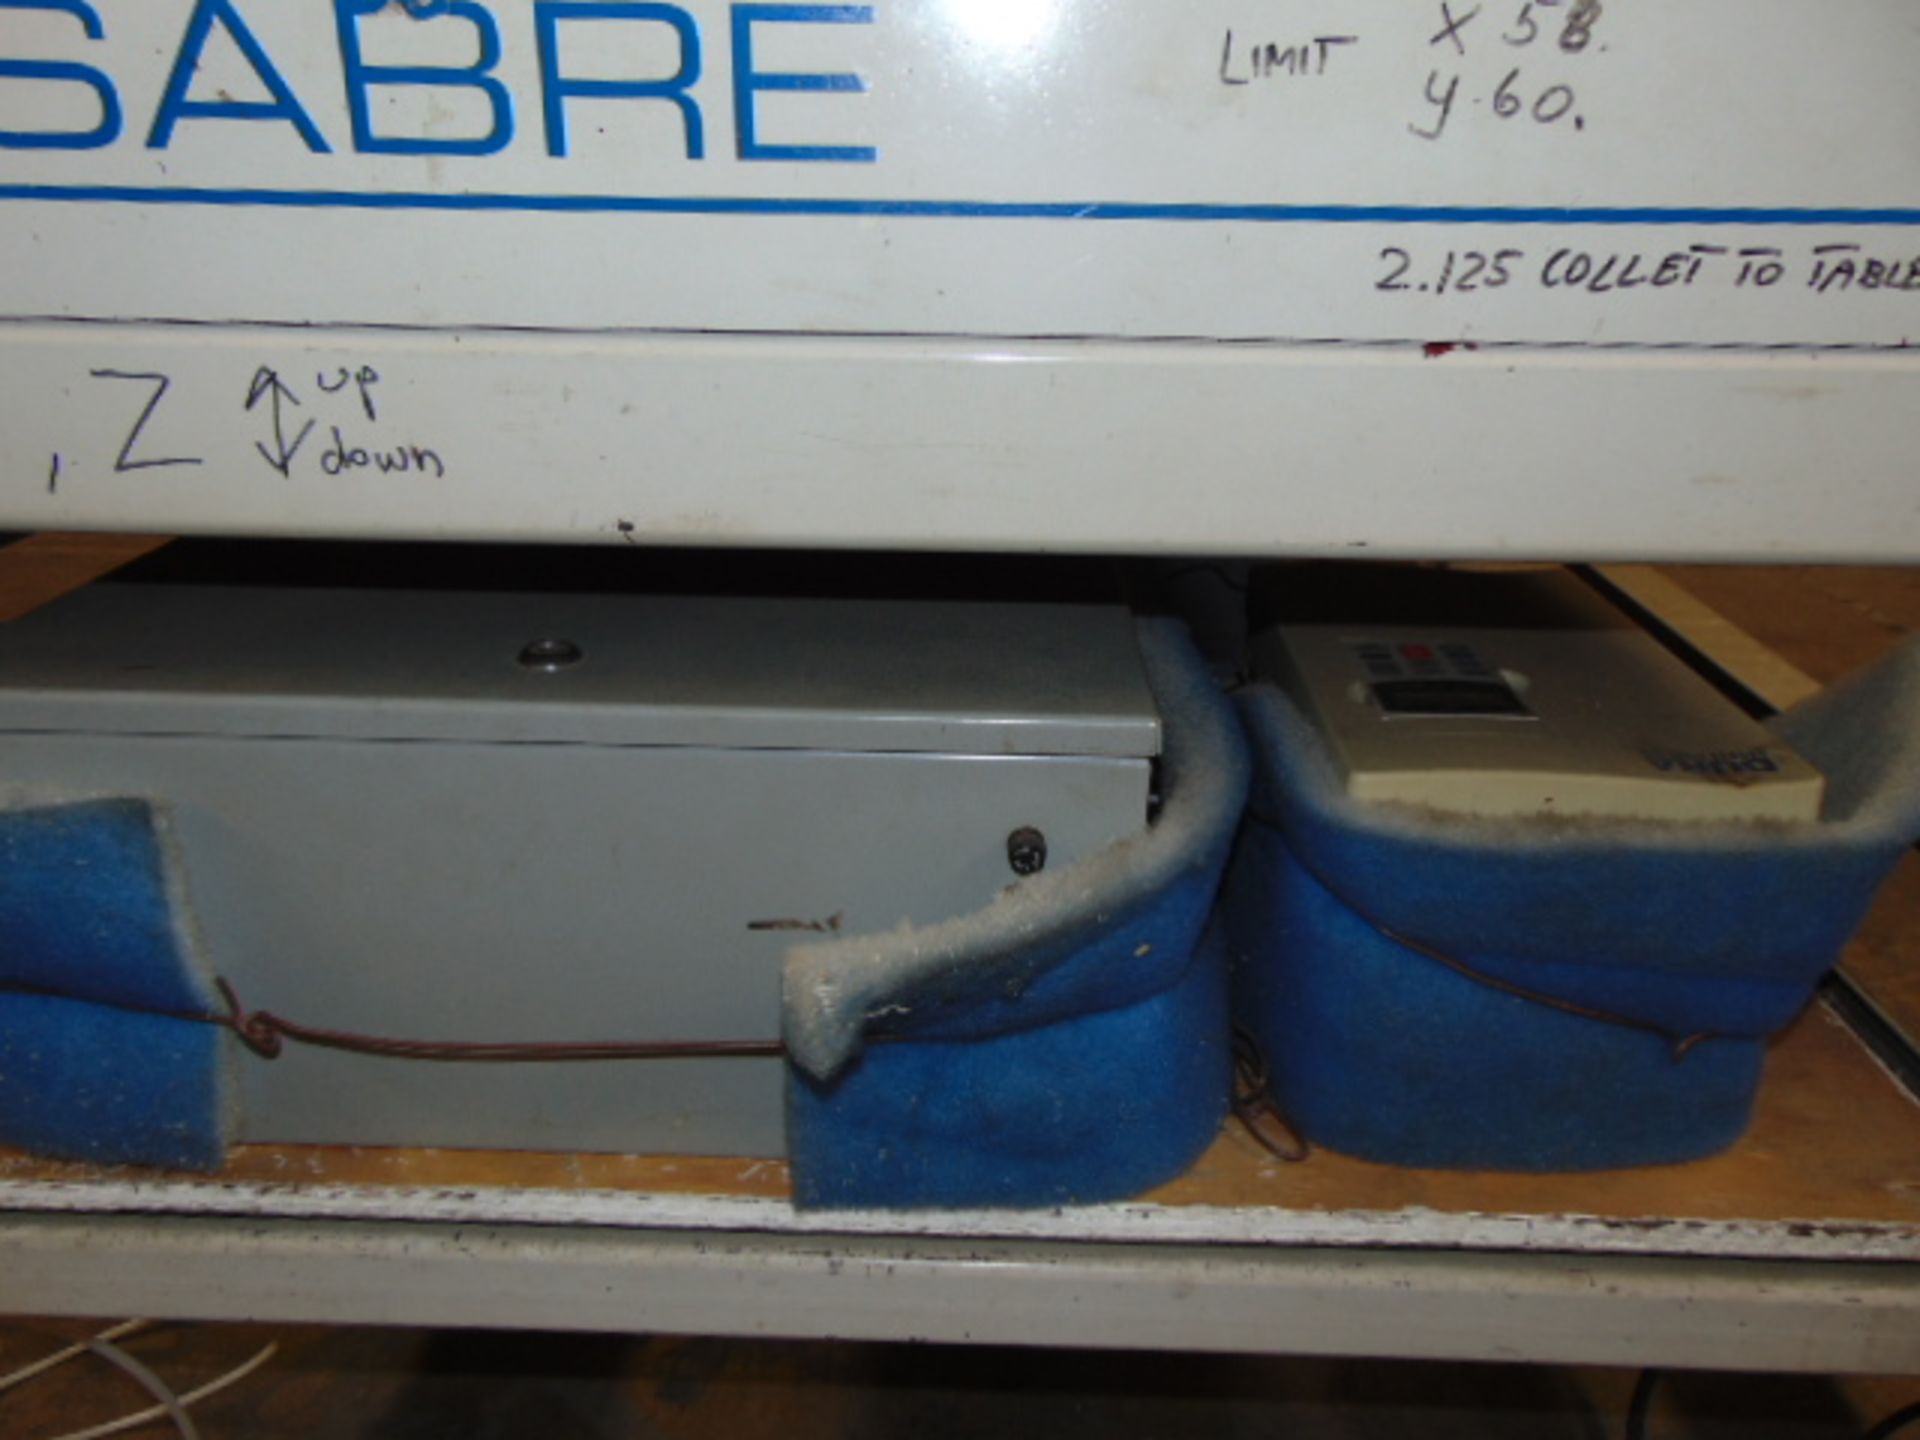 PROGRAMMABLE ROUTER TABLE, SHOP SABRE MDL. 4860 (no computer) - Image 3 of 6